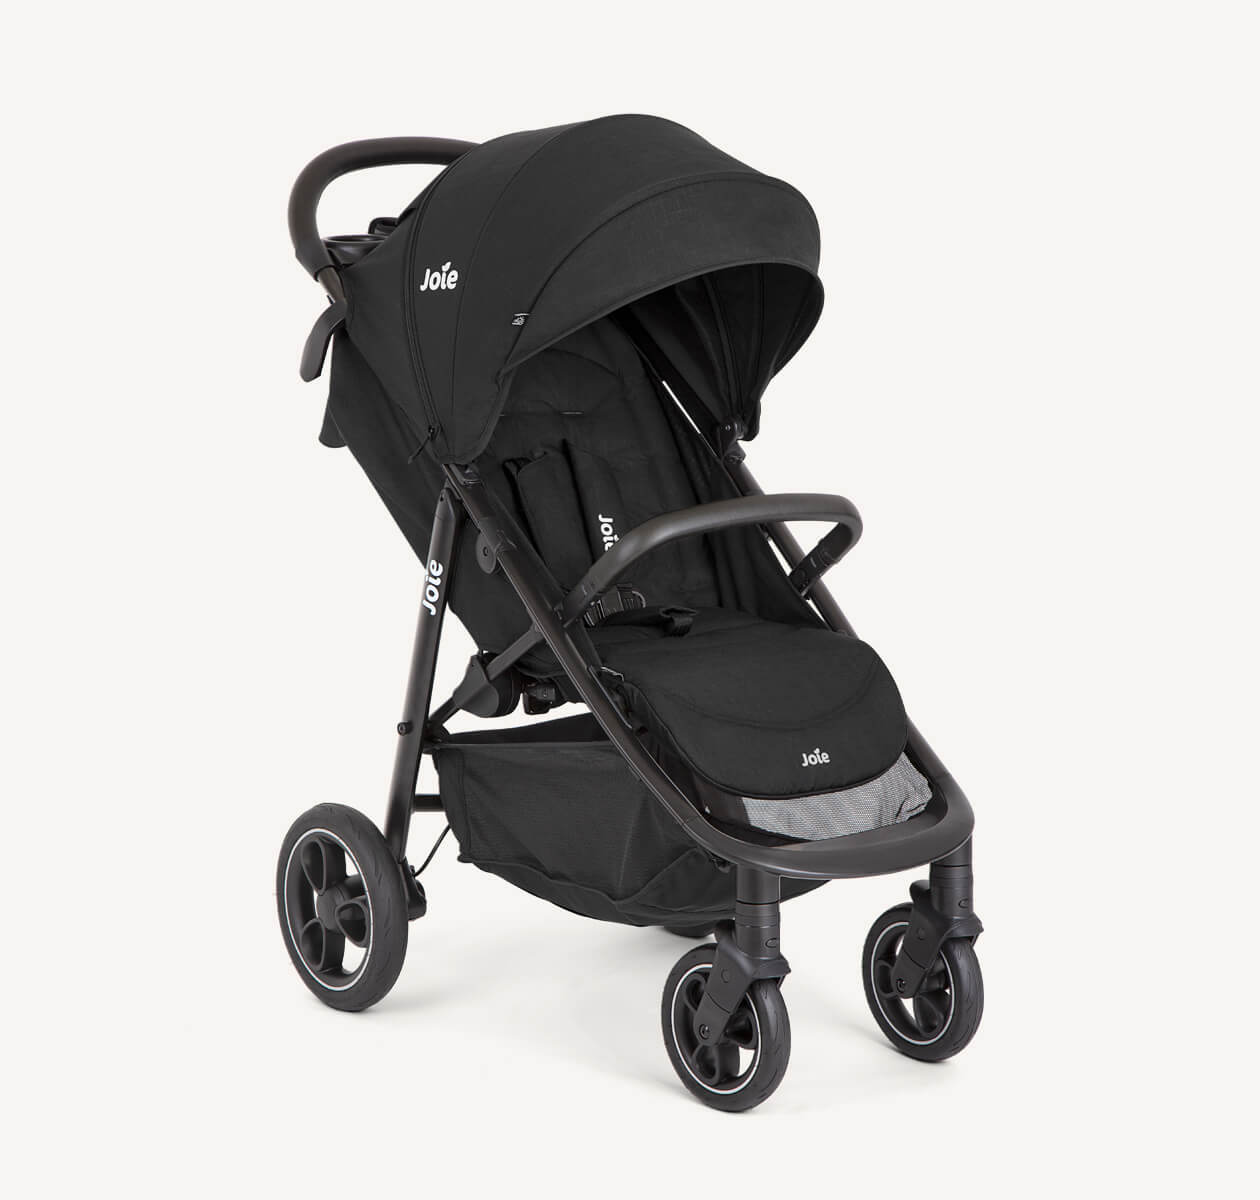 Joie black litetrax pro stroller at an angle. 